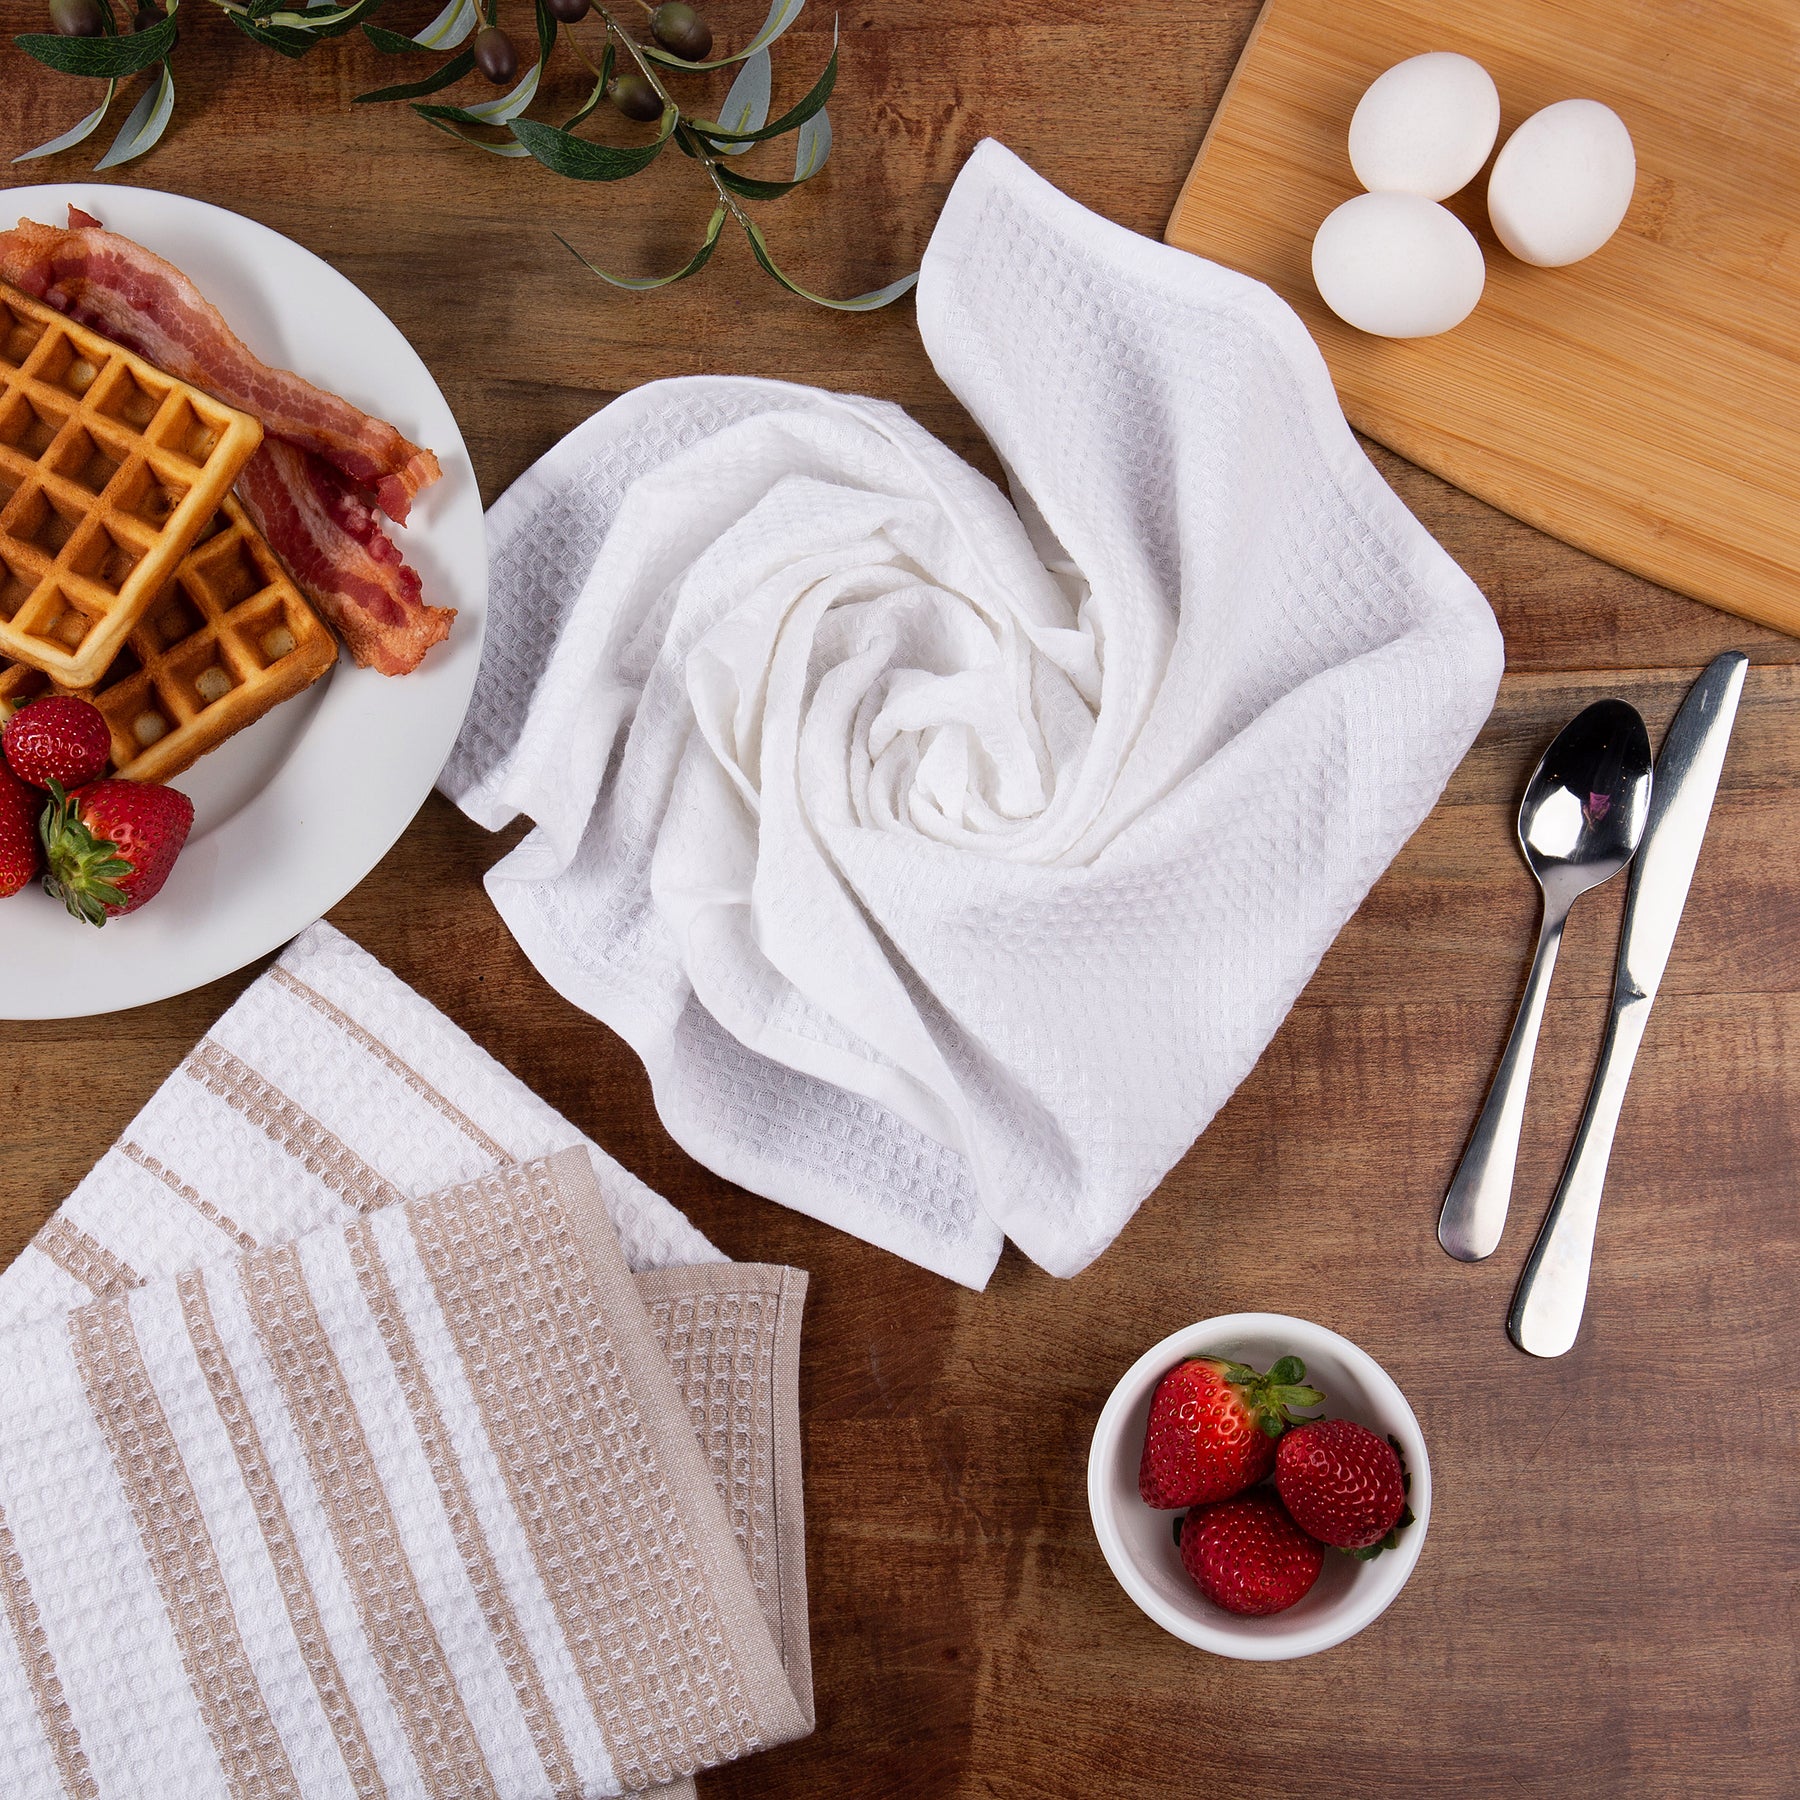 Kitchen Towels 100% Cotton Red Dish Towels, Hand Towels, Tea Towels Flat,  Terry, Waffle and Herringbone Dish Towels for Drying Dishes, 28 in x 16 in